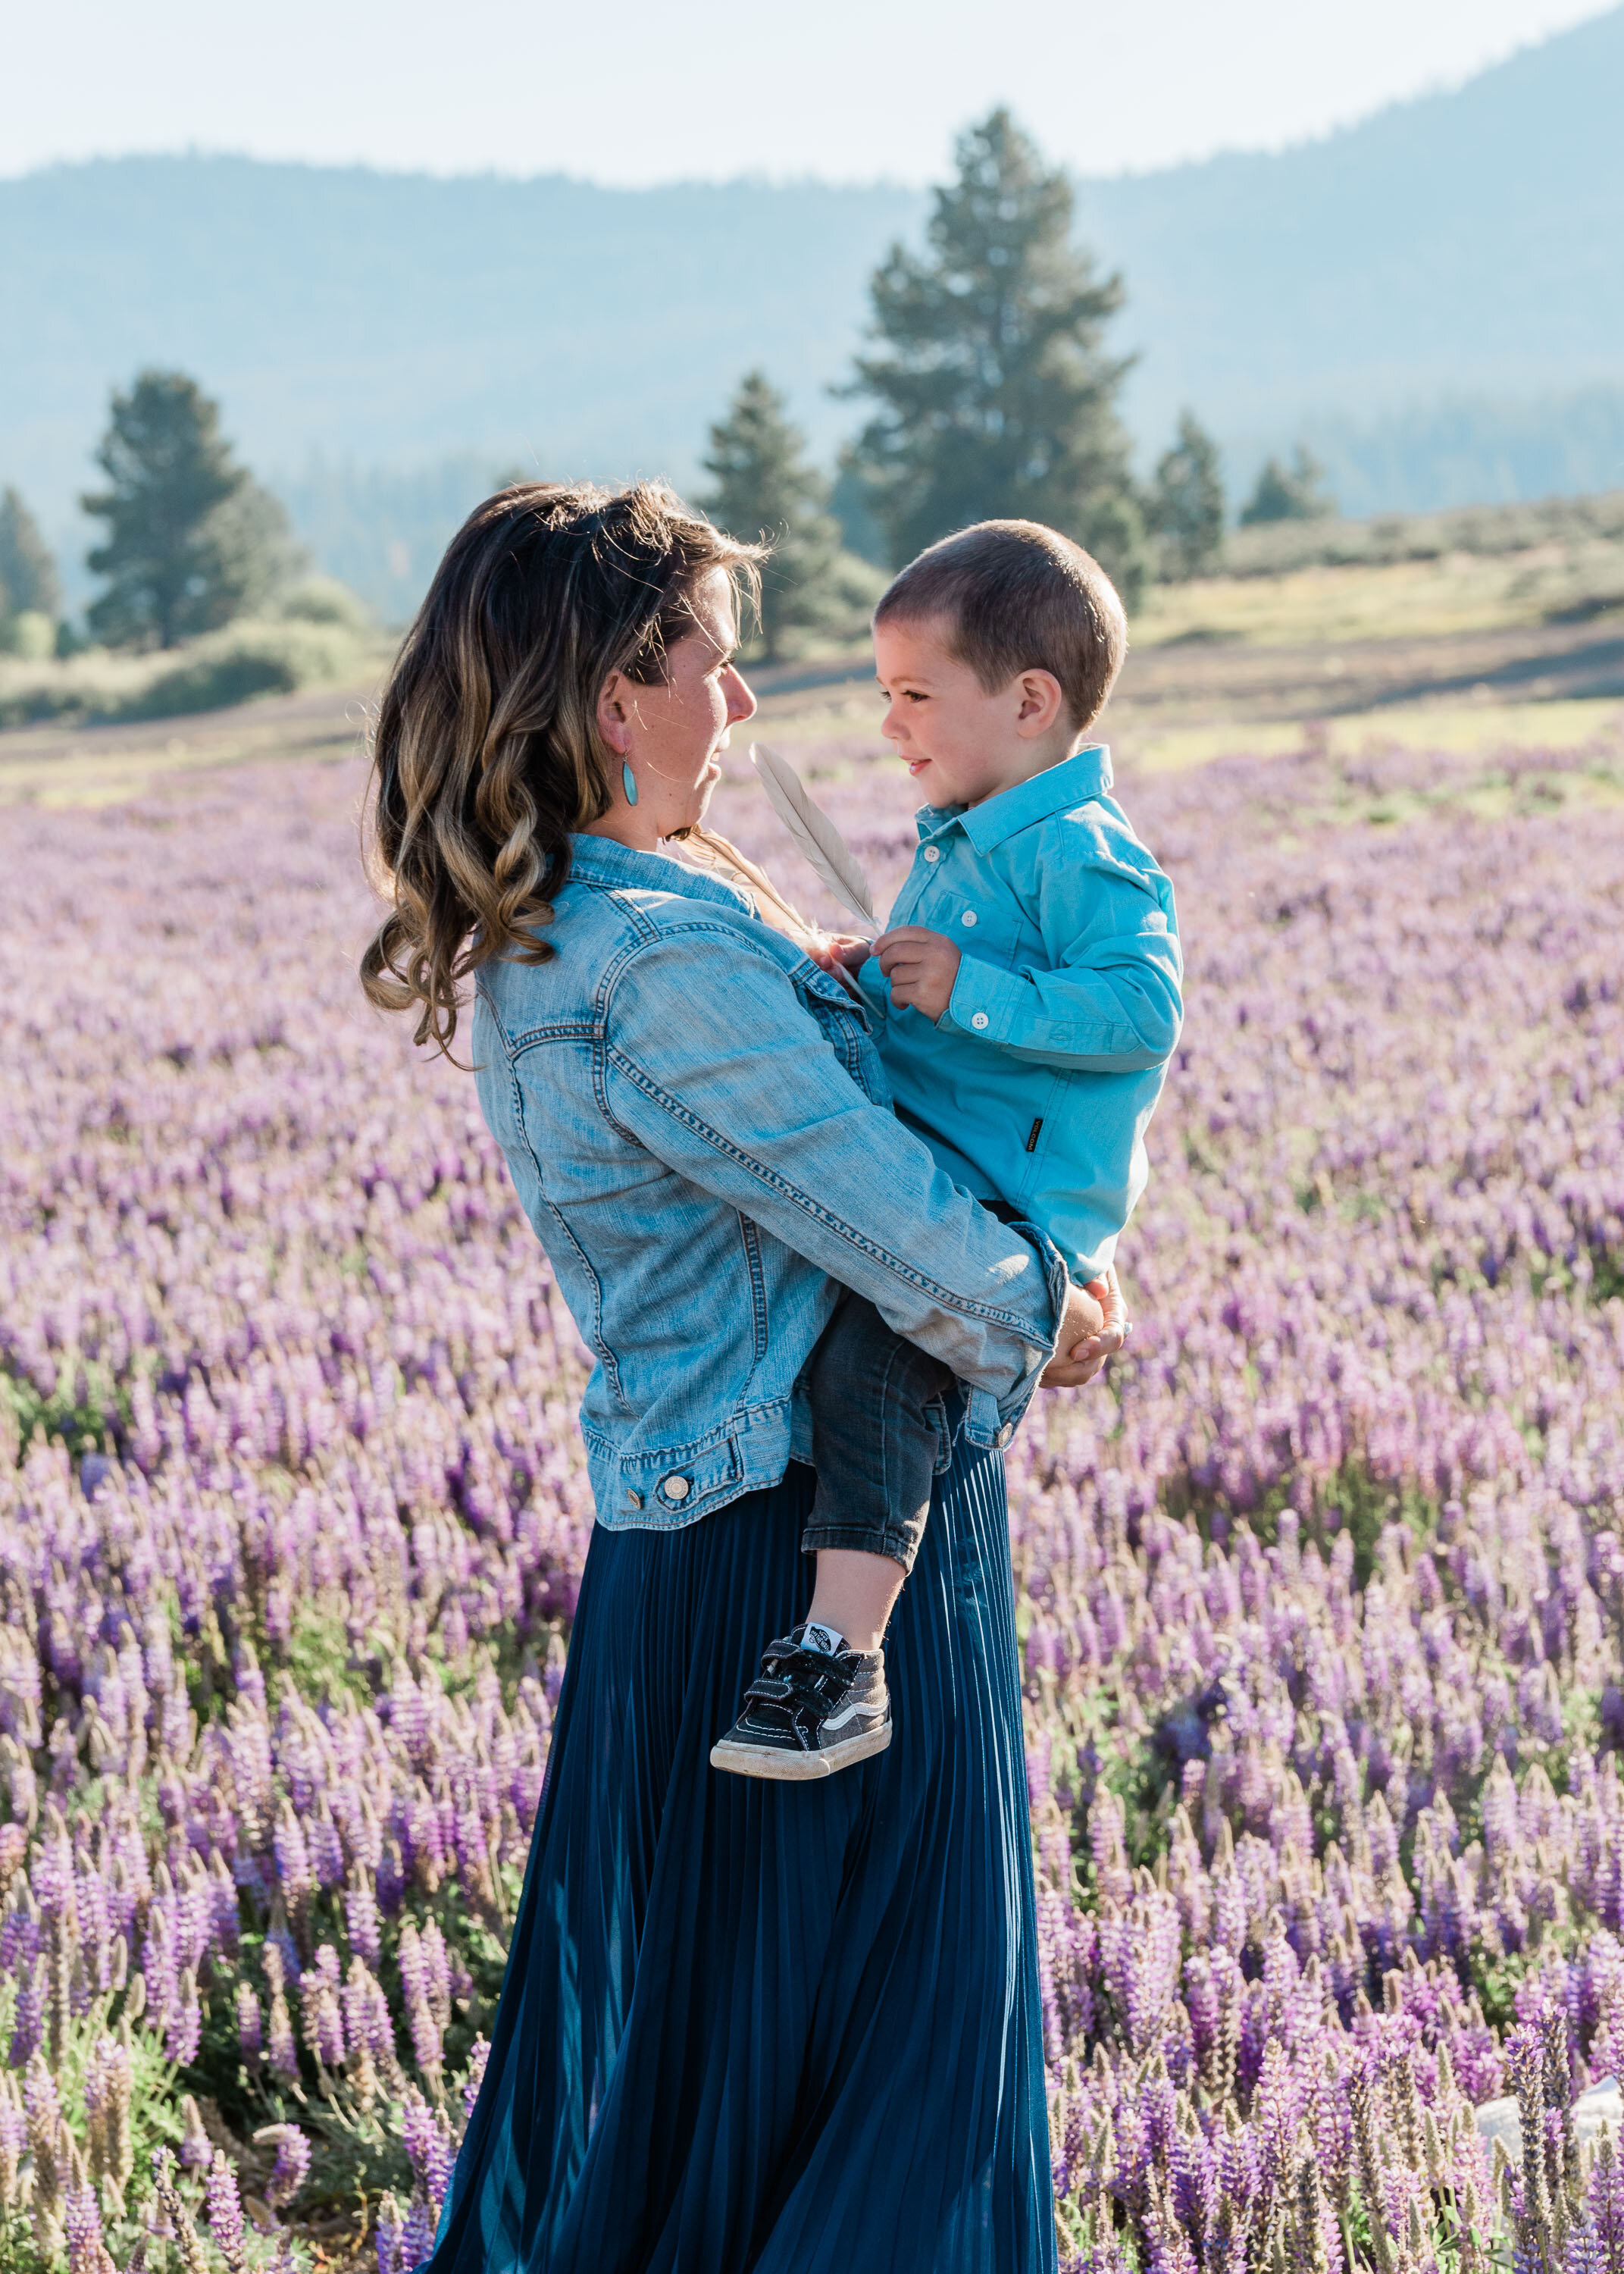 Lupine Wildflowers in Truckee, Family Photo - Kelli Price Photography